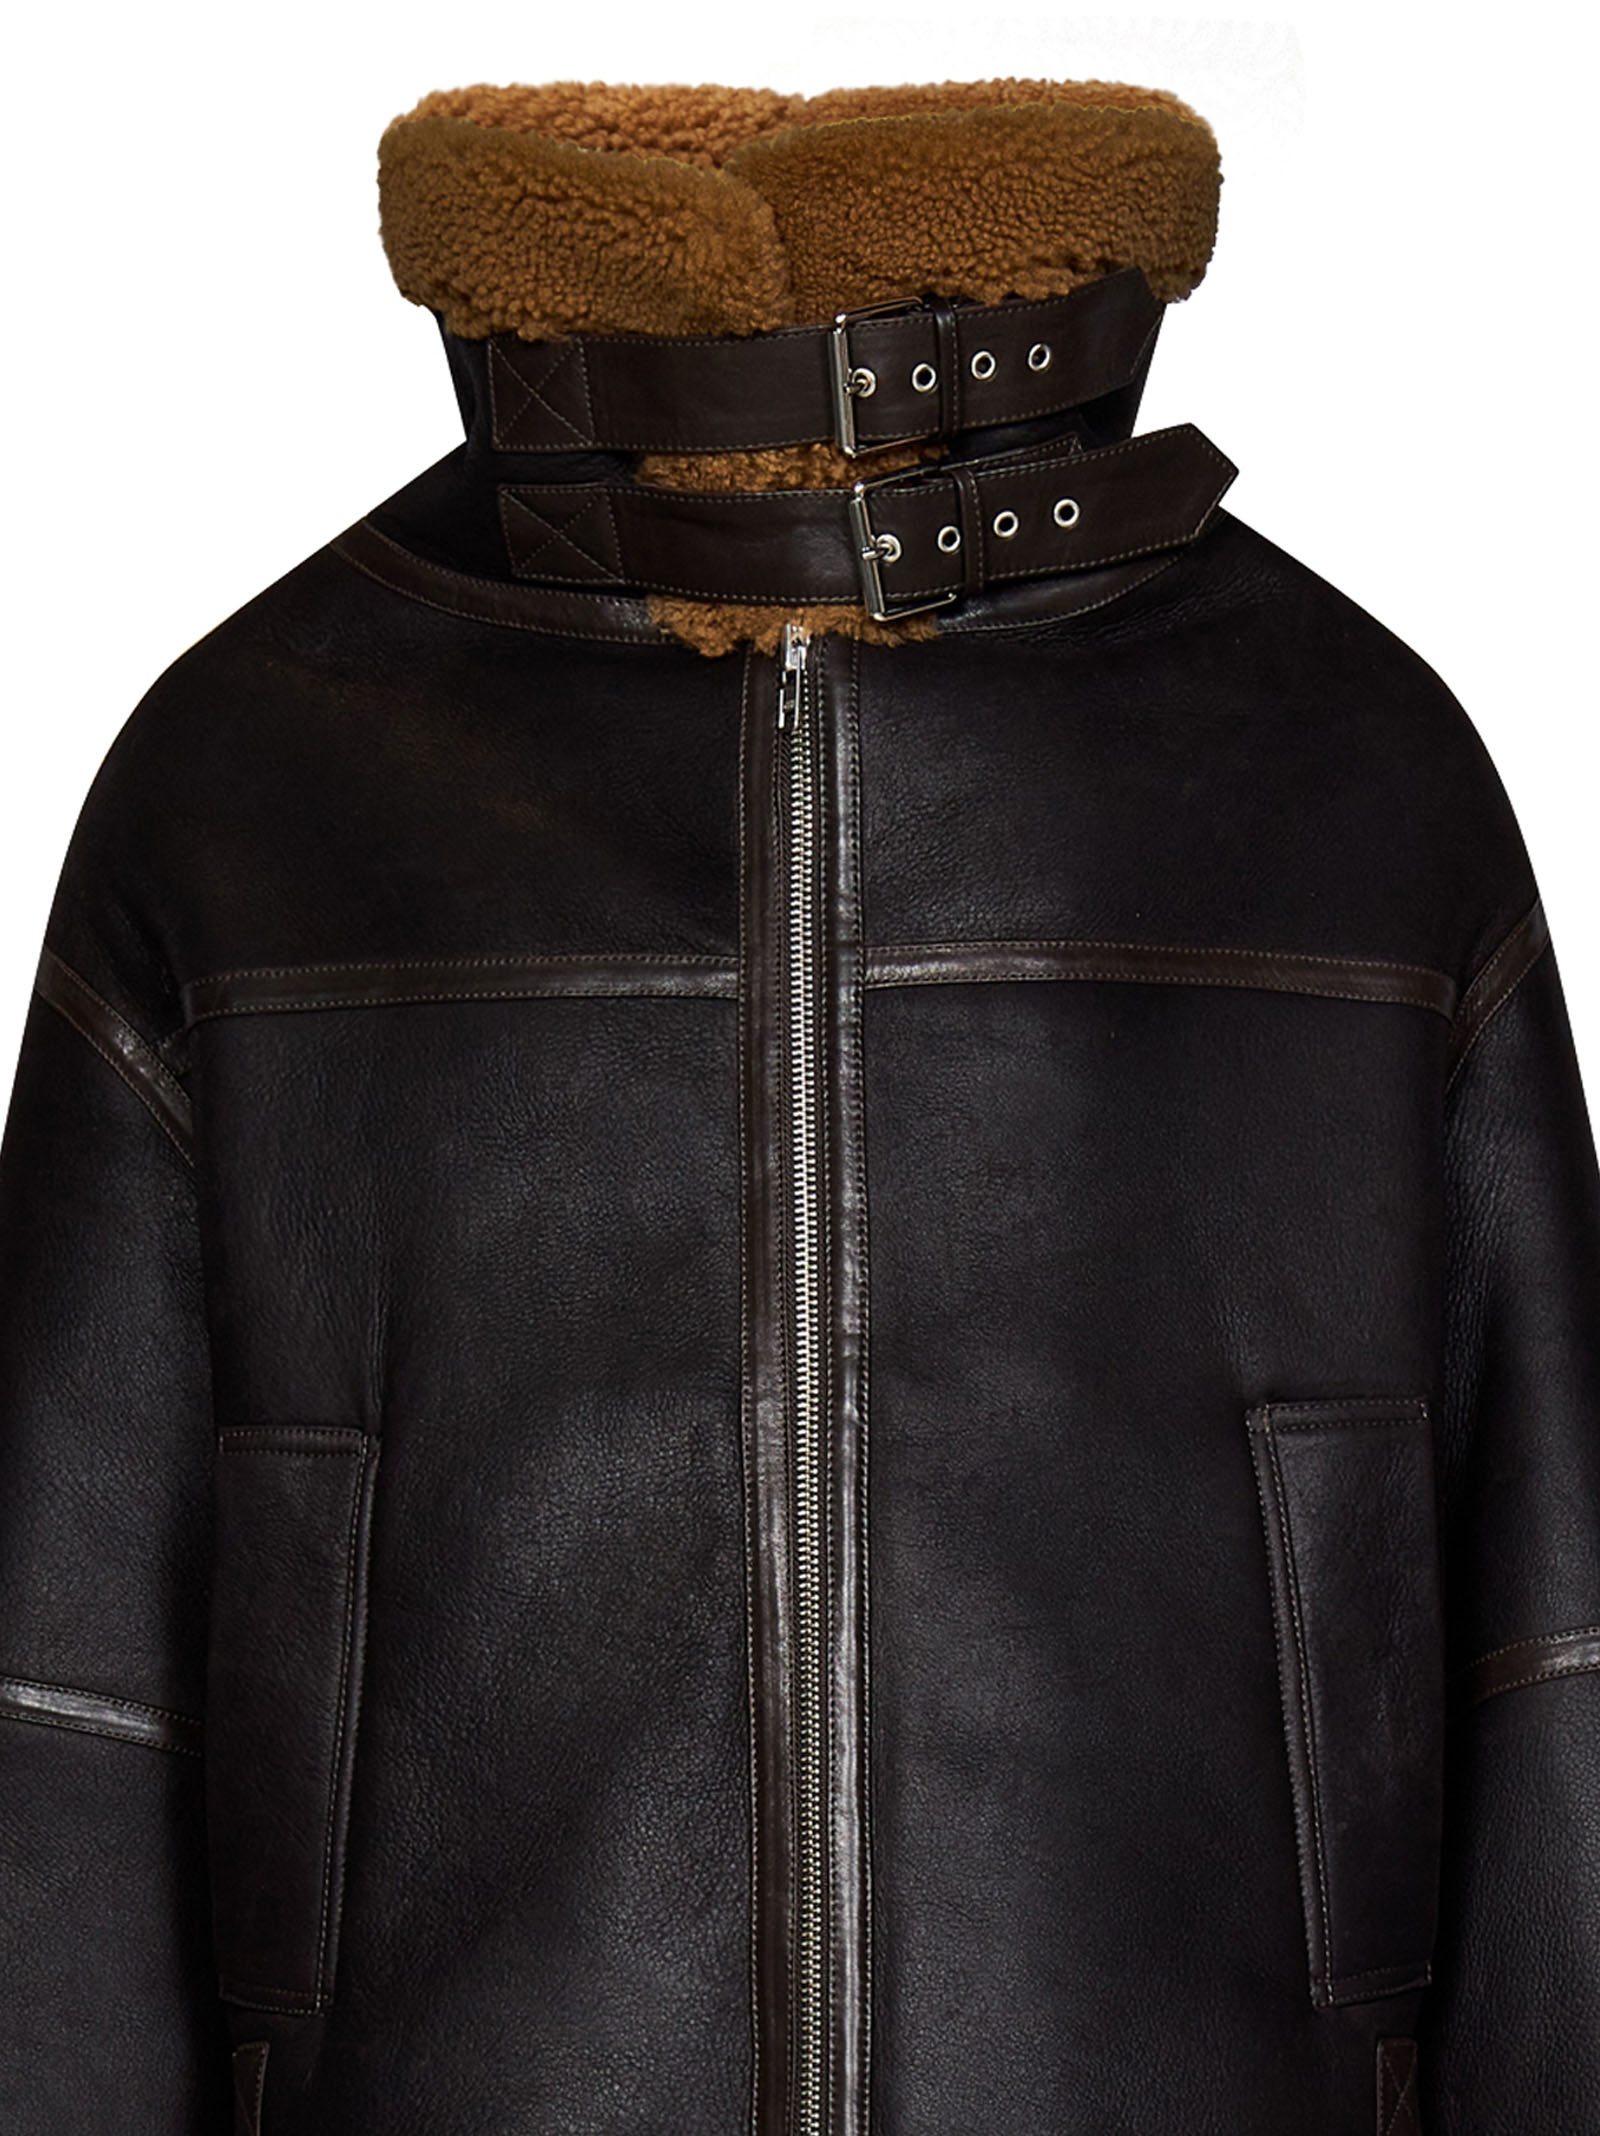 Dark brown leather jacket with brown shearling hem, collar and cuffs. - 3